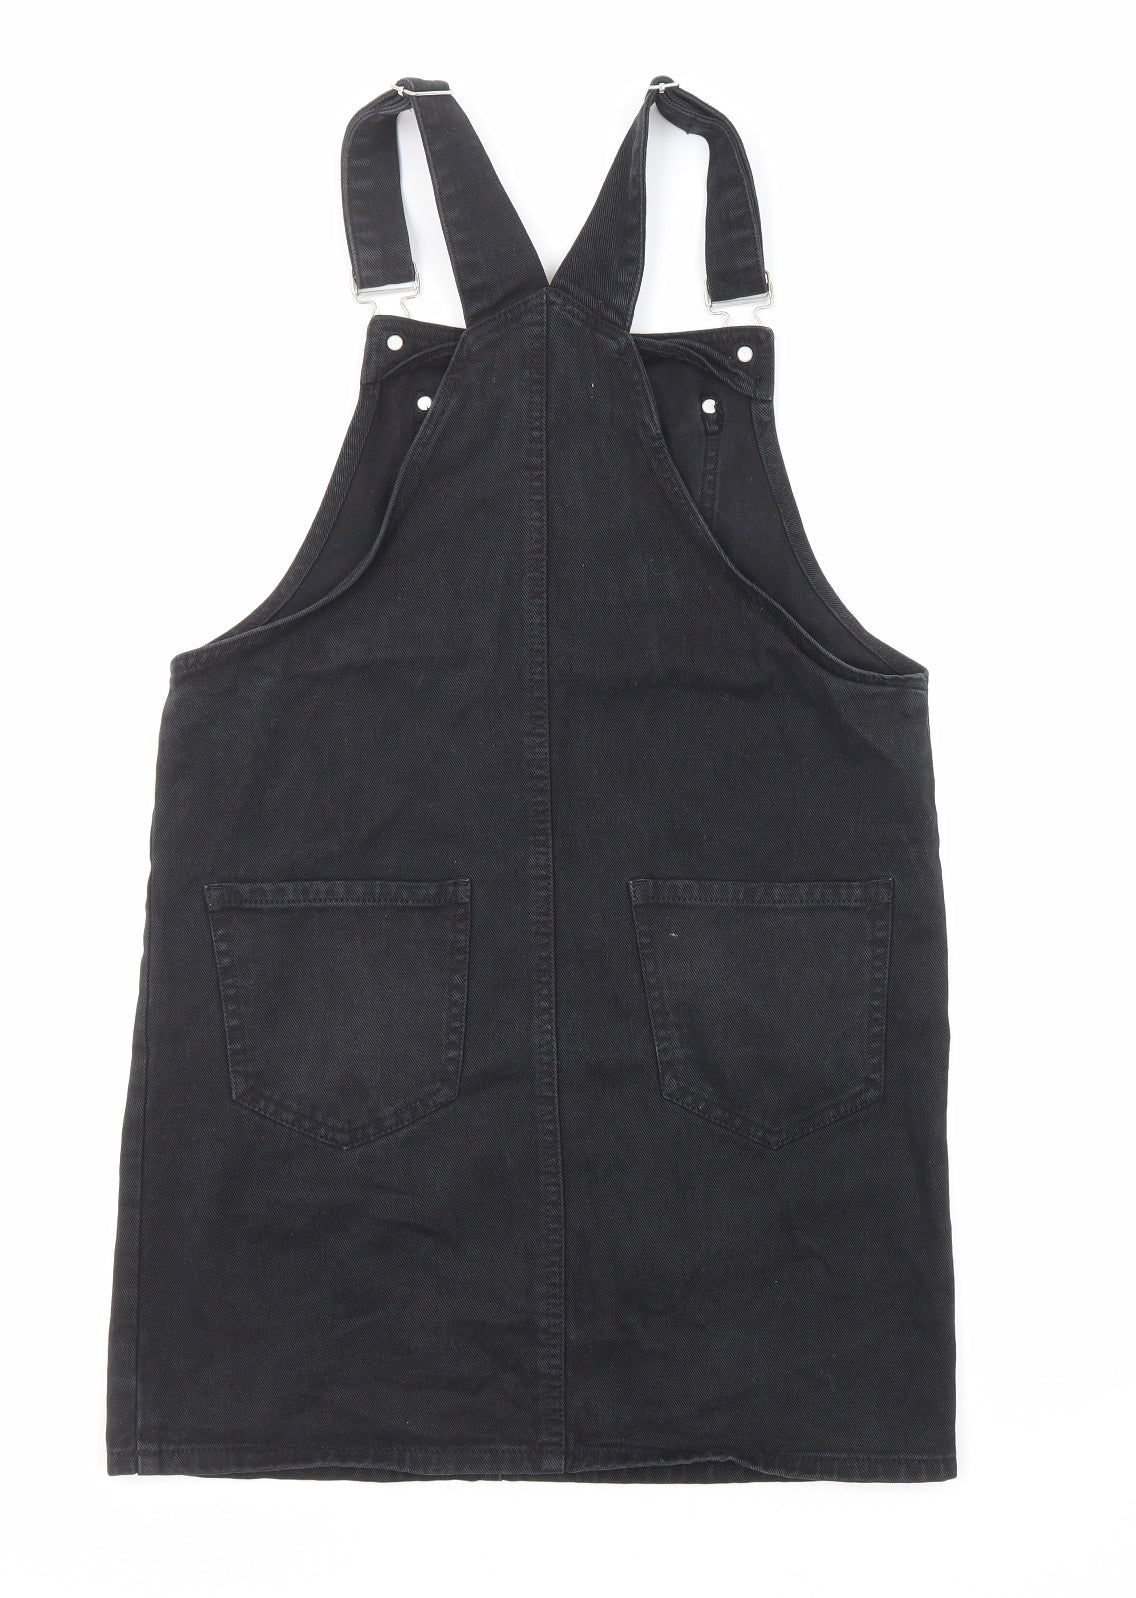 New Look Womens Black Cotton Pinafore/Dungaree Dress Size 8 Square Neck Button